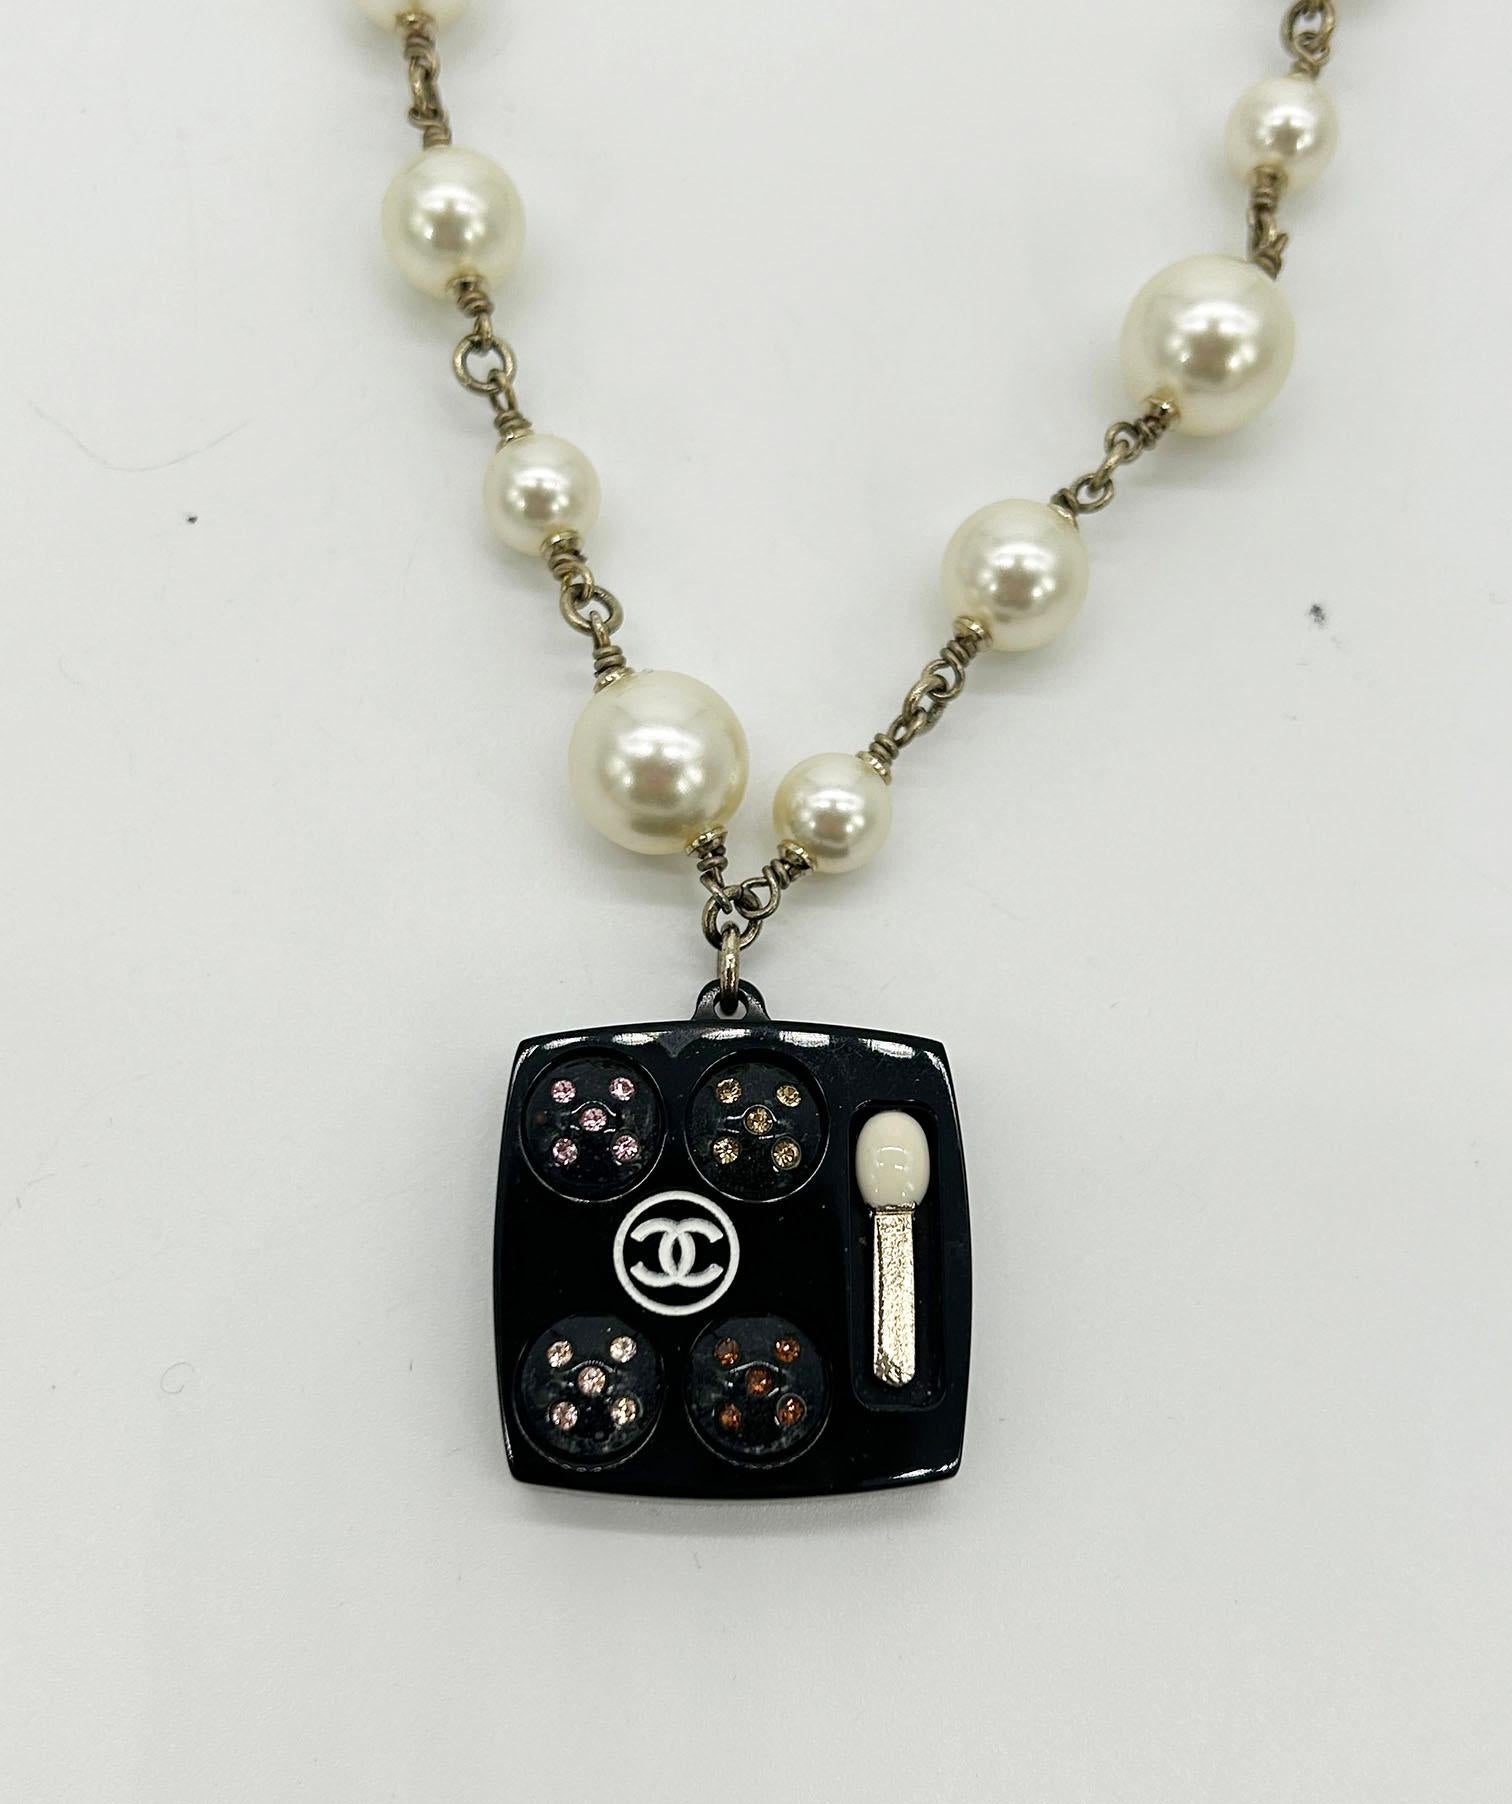 Chanel Vintage Make Up Charm Beaded Pearl Chain Necklace For Sale 2